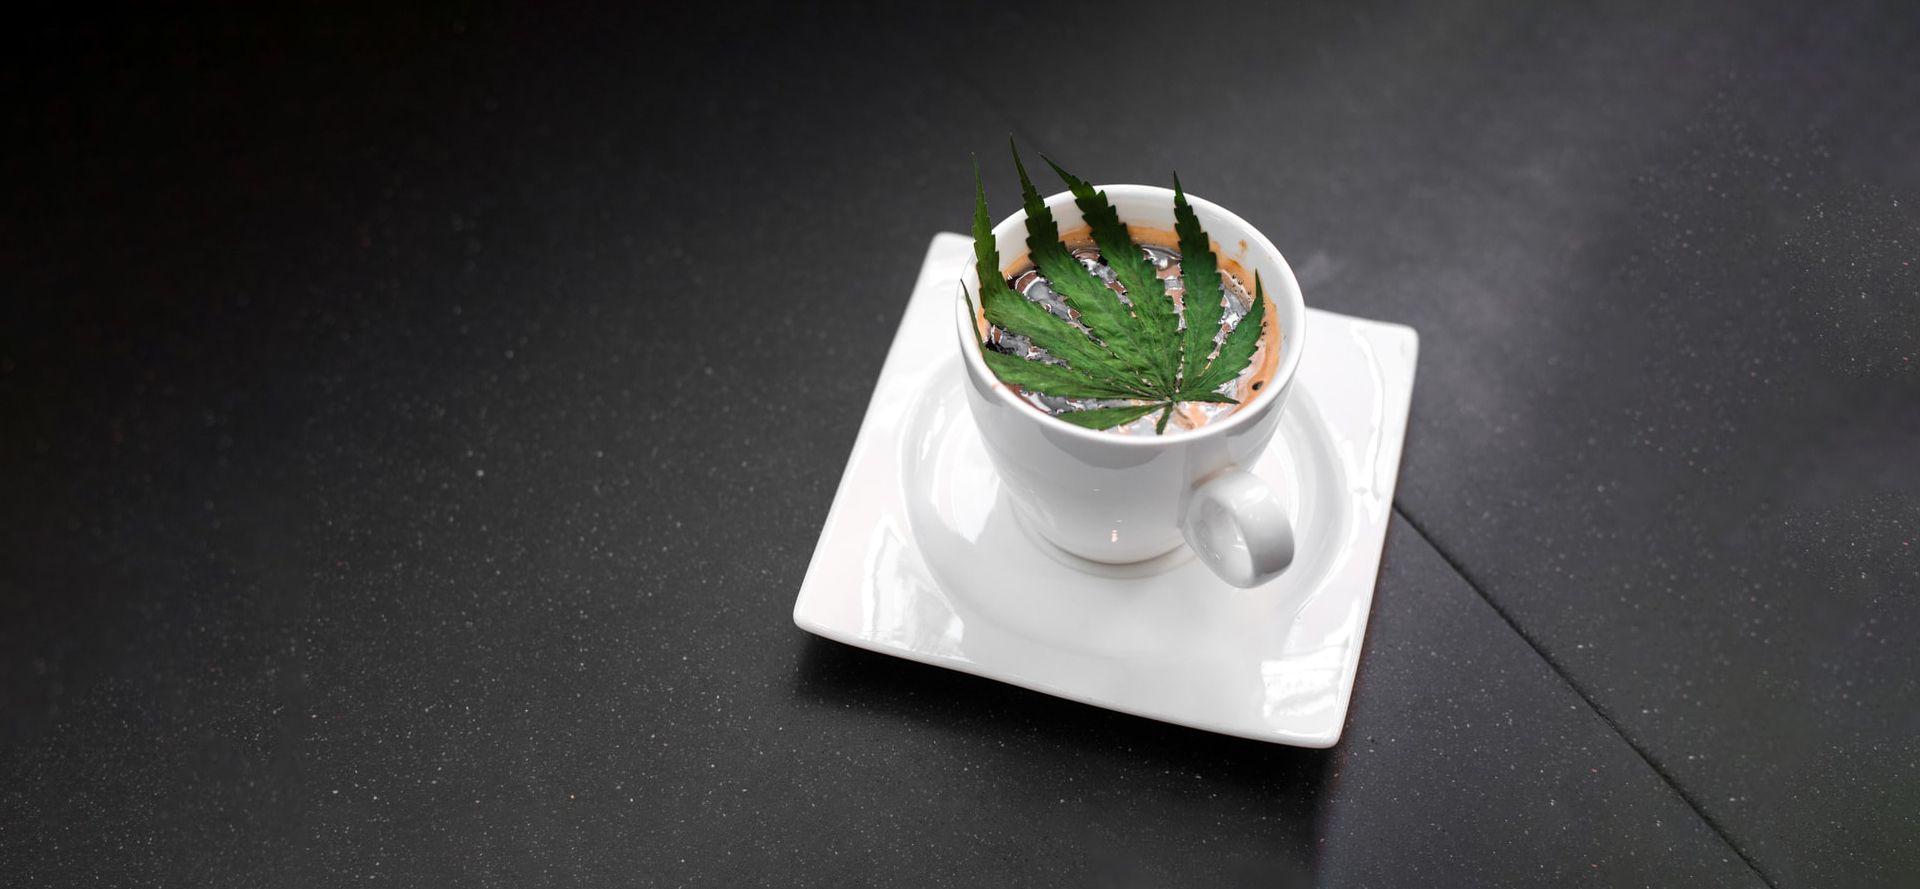 Cup Of Coffee With CBD.